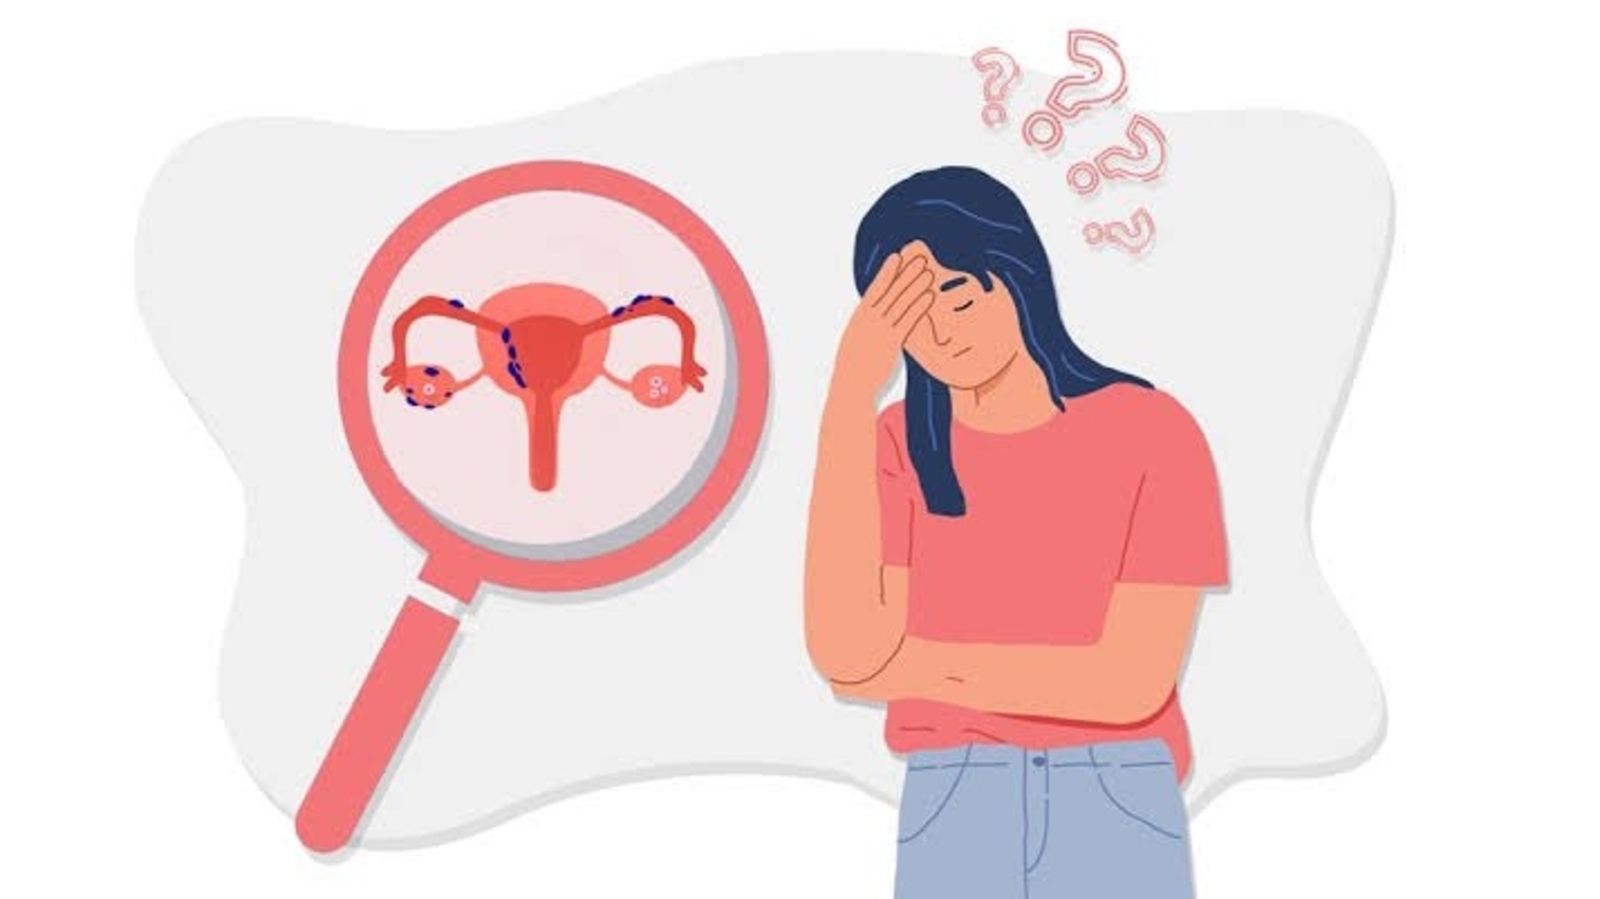 Primary ovarian insufficiency: Causes, signs and symptoms, POI treatment tips | Health